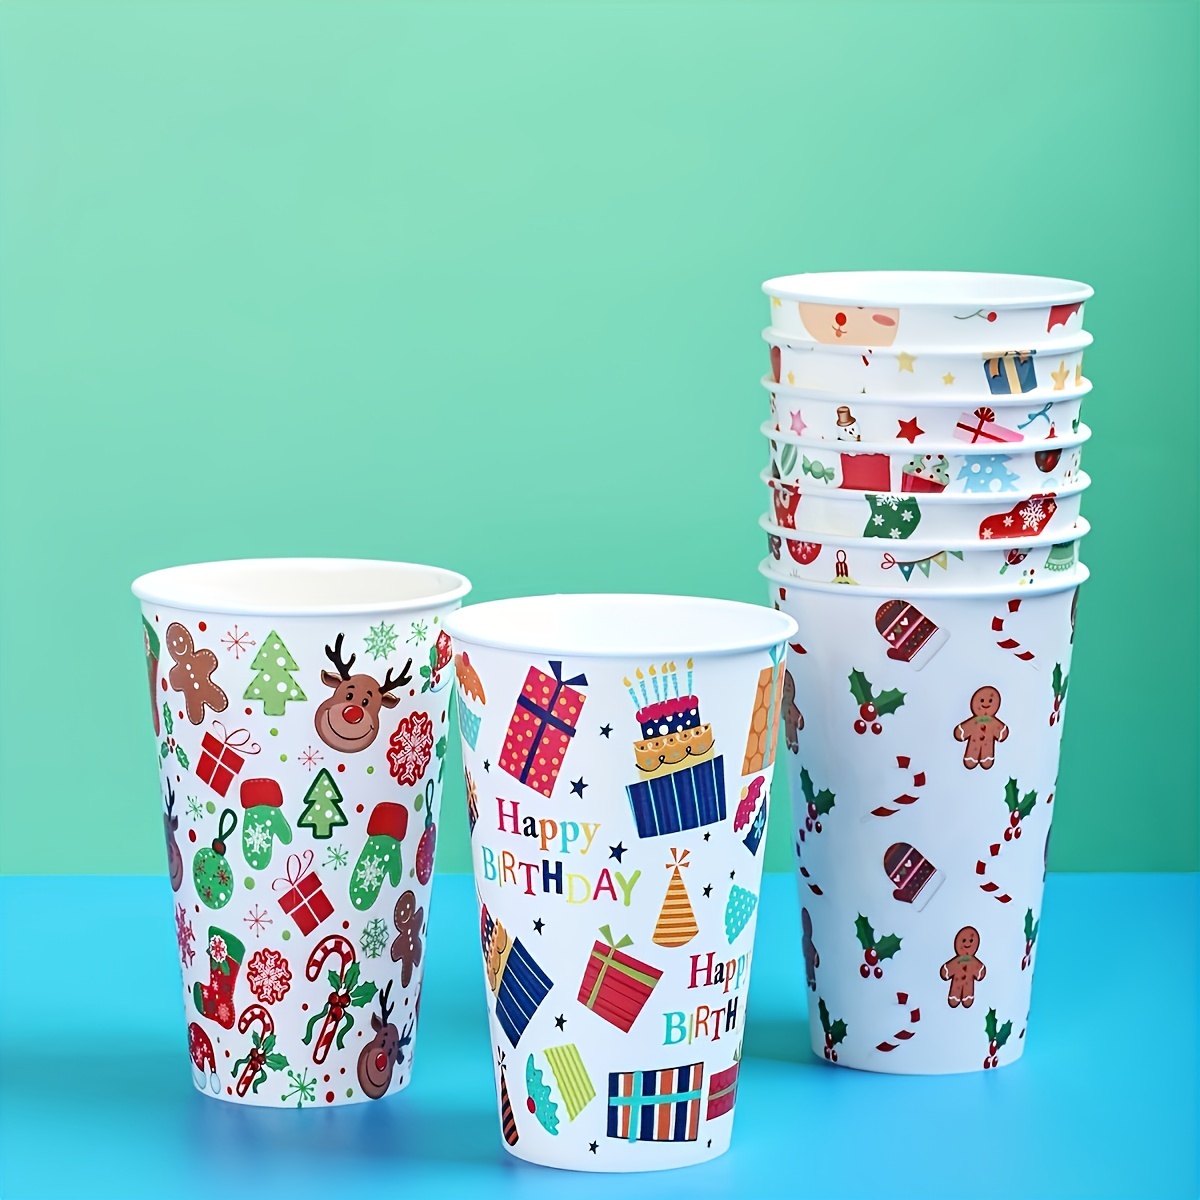 Santa 12oz Disposable Paper Christmas Cups Recyclable with 12-16oz